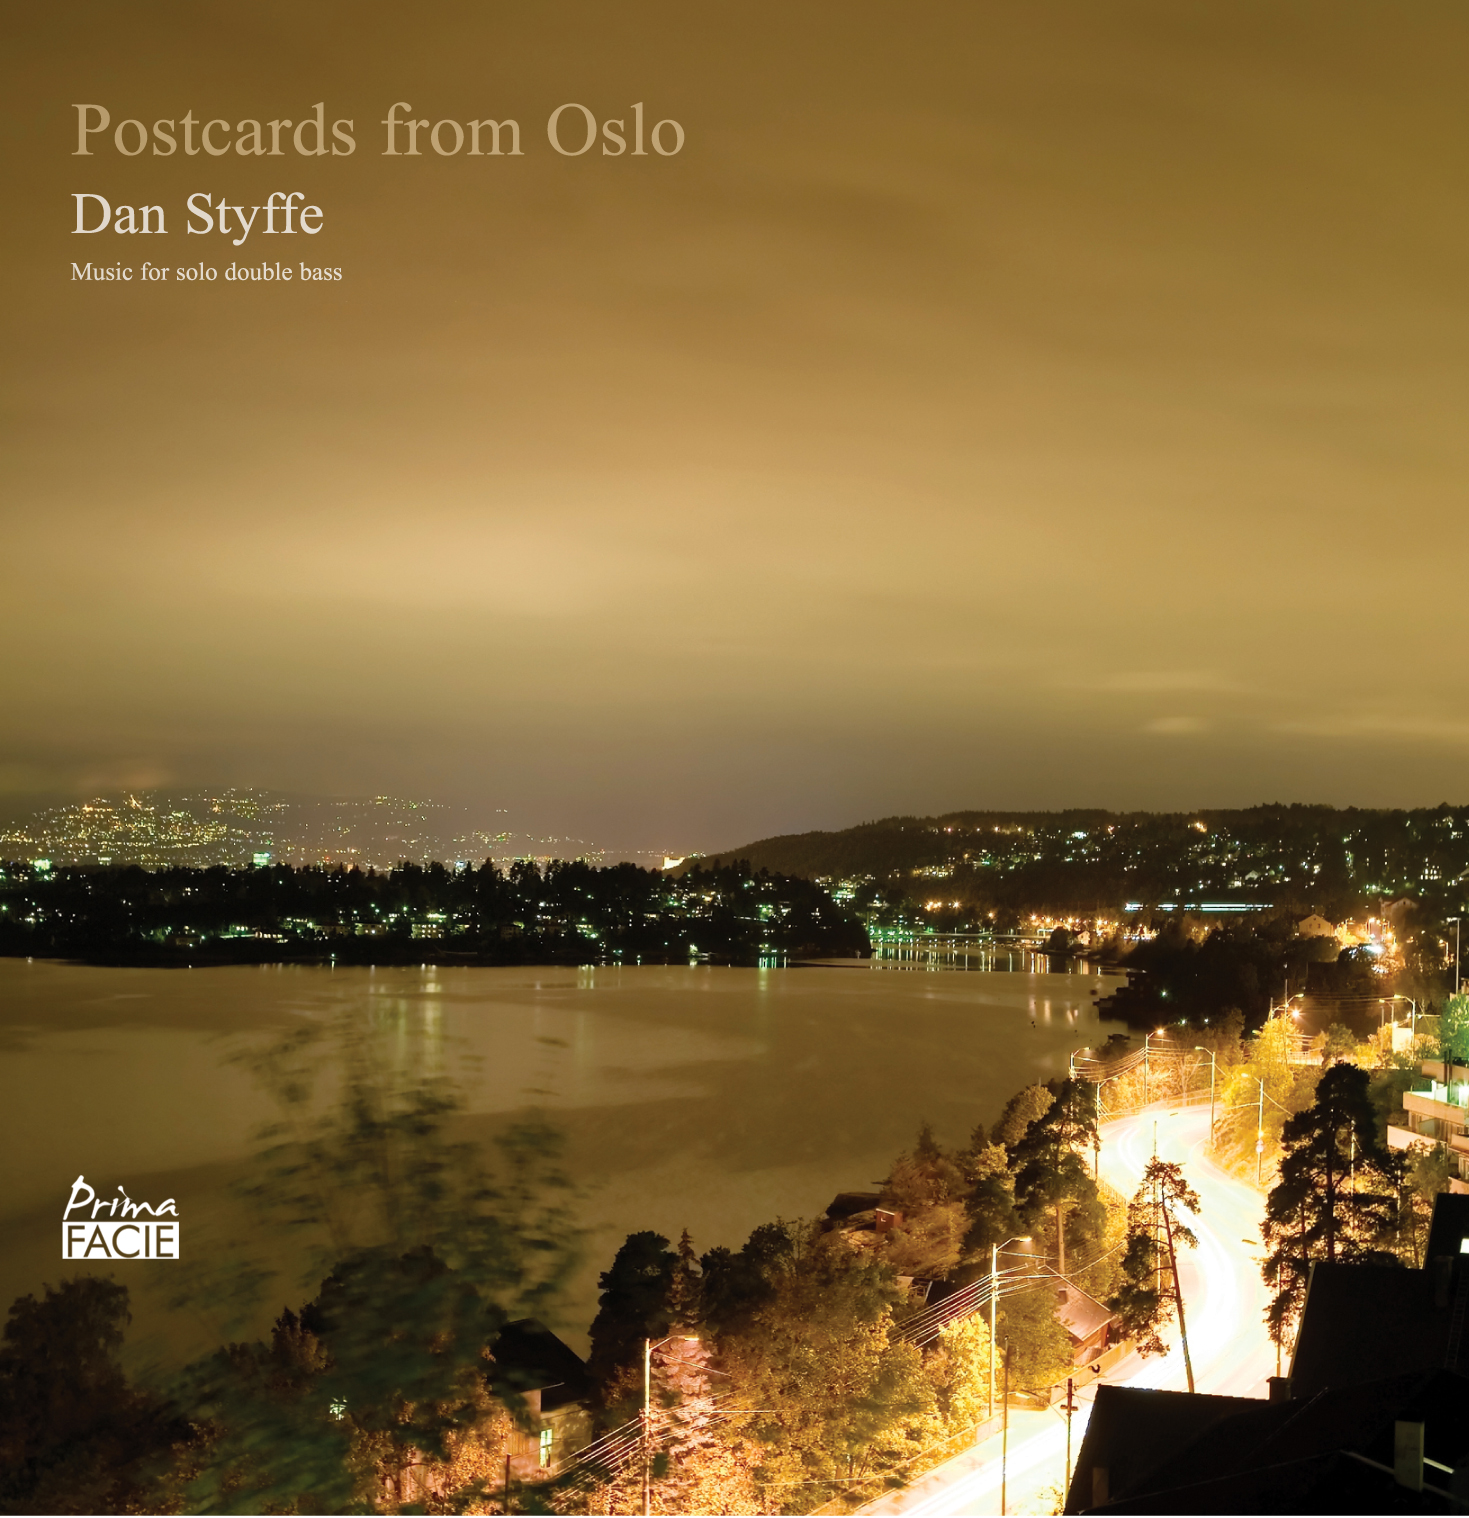 Postcards from Oslo